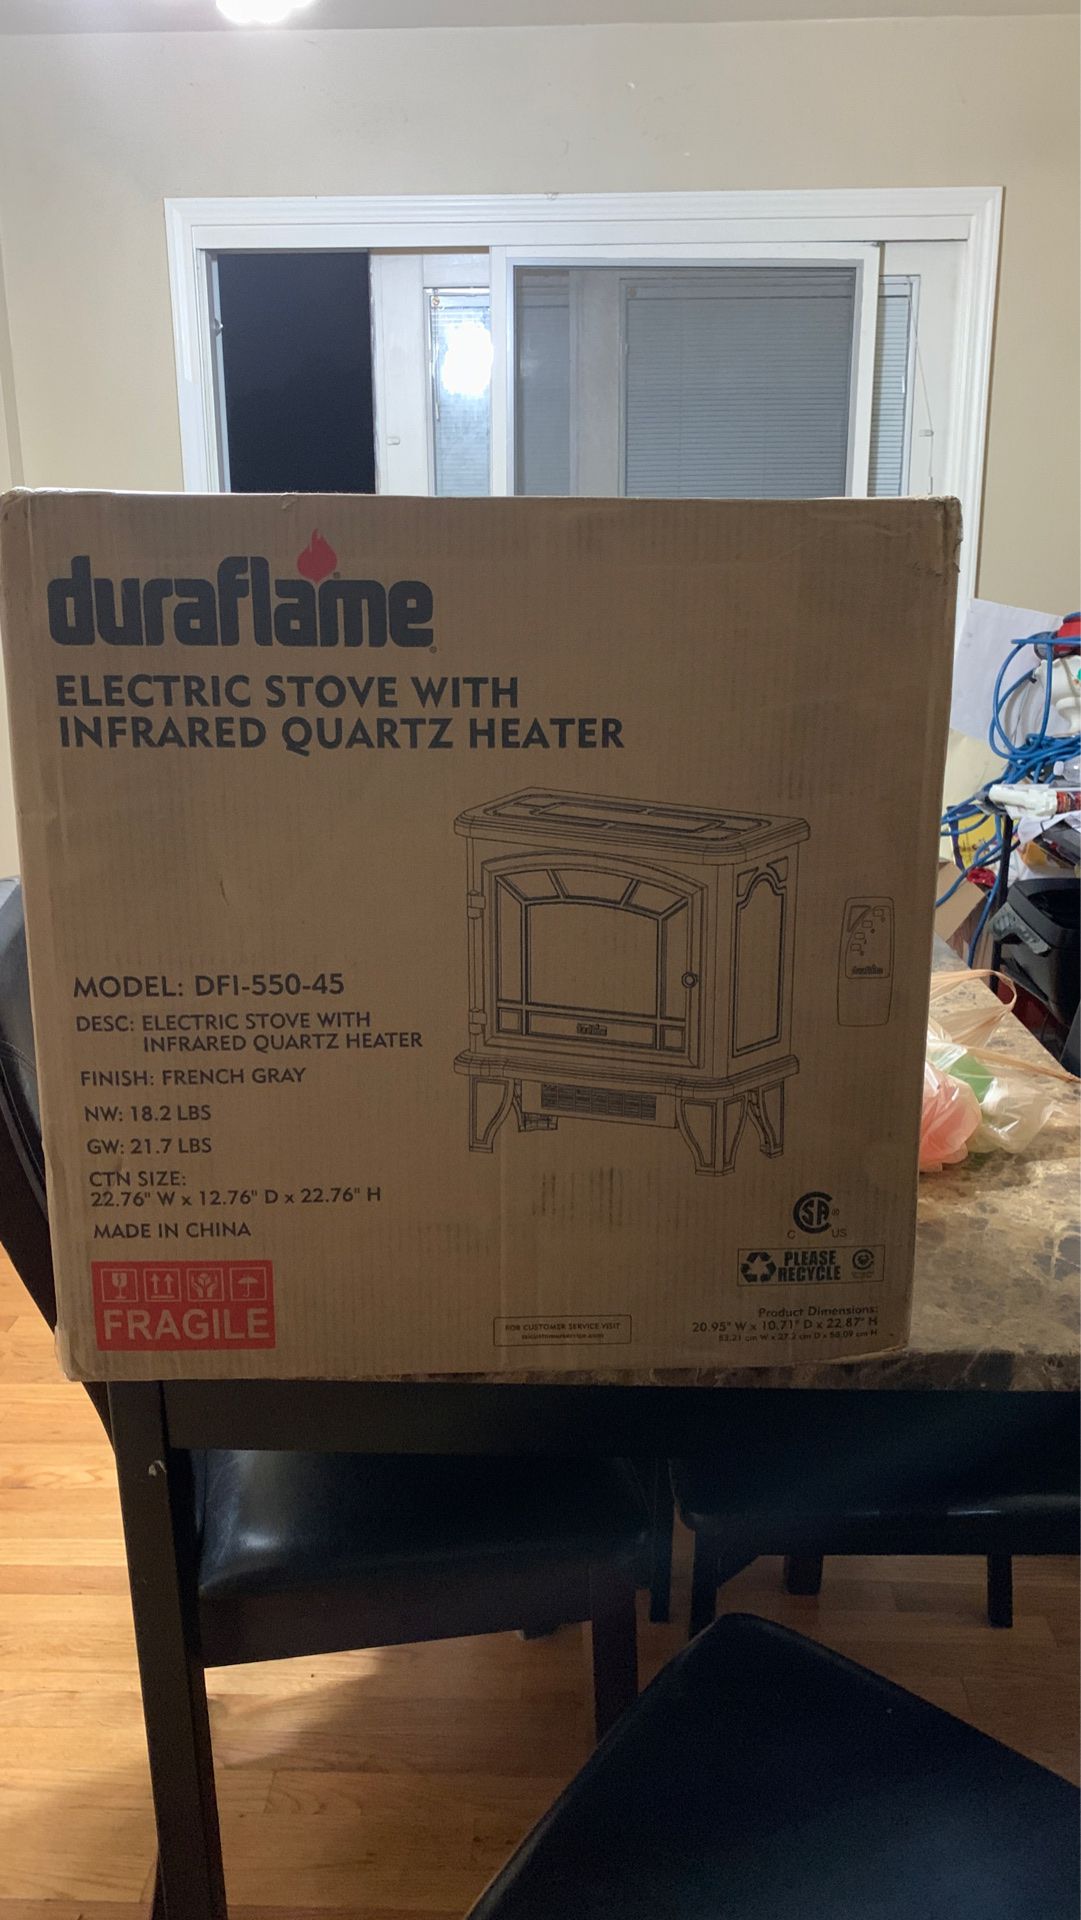 Duraflame Electric stove with infrared quartz heater